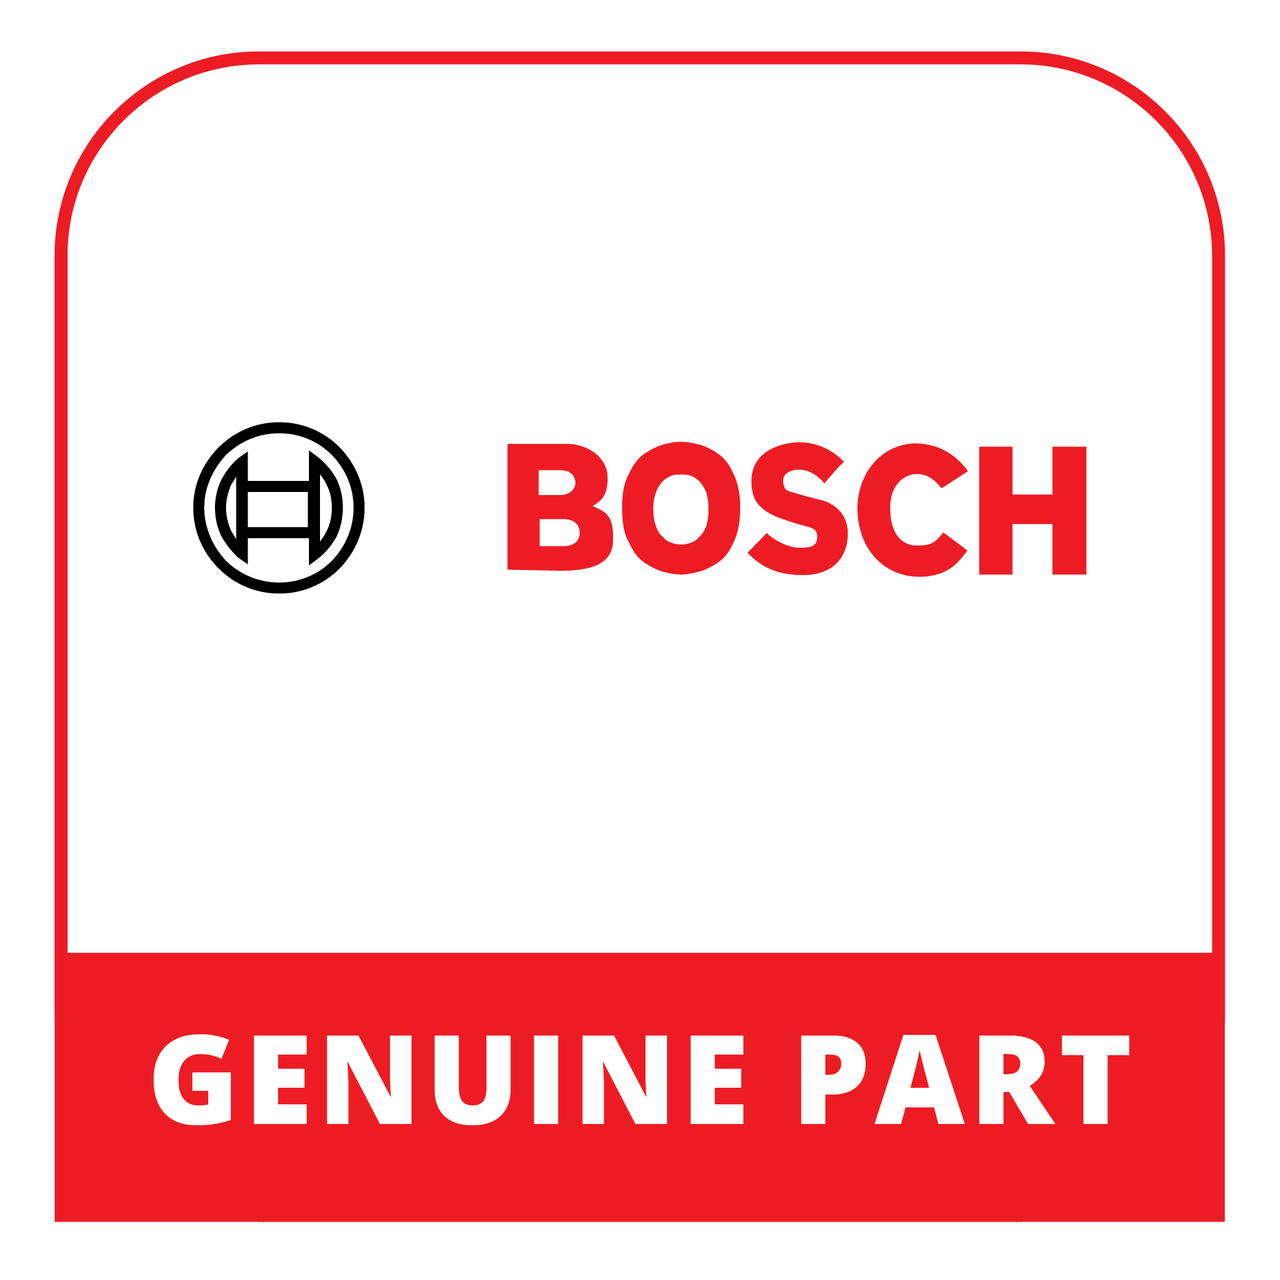 Bosch (Thermador) 23000018 - Front Panel - Genuine Bosch (Thermador) Part